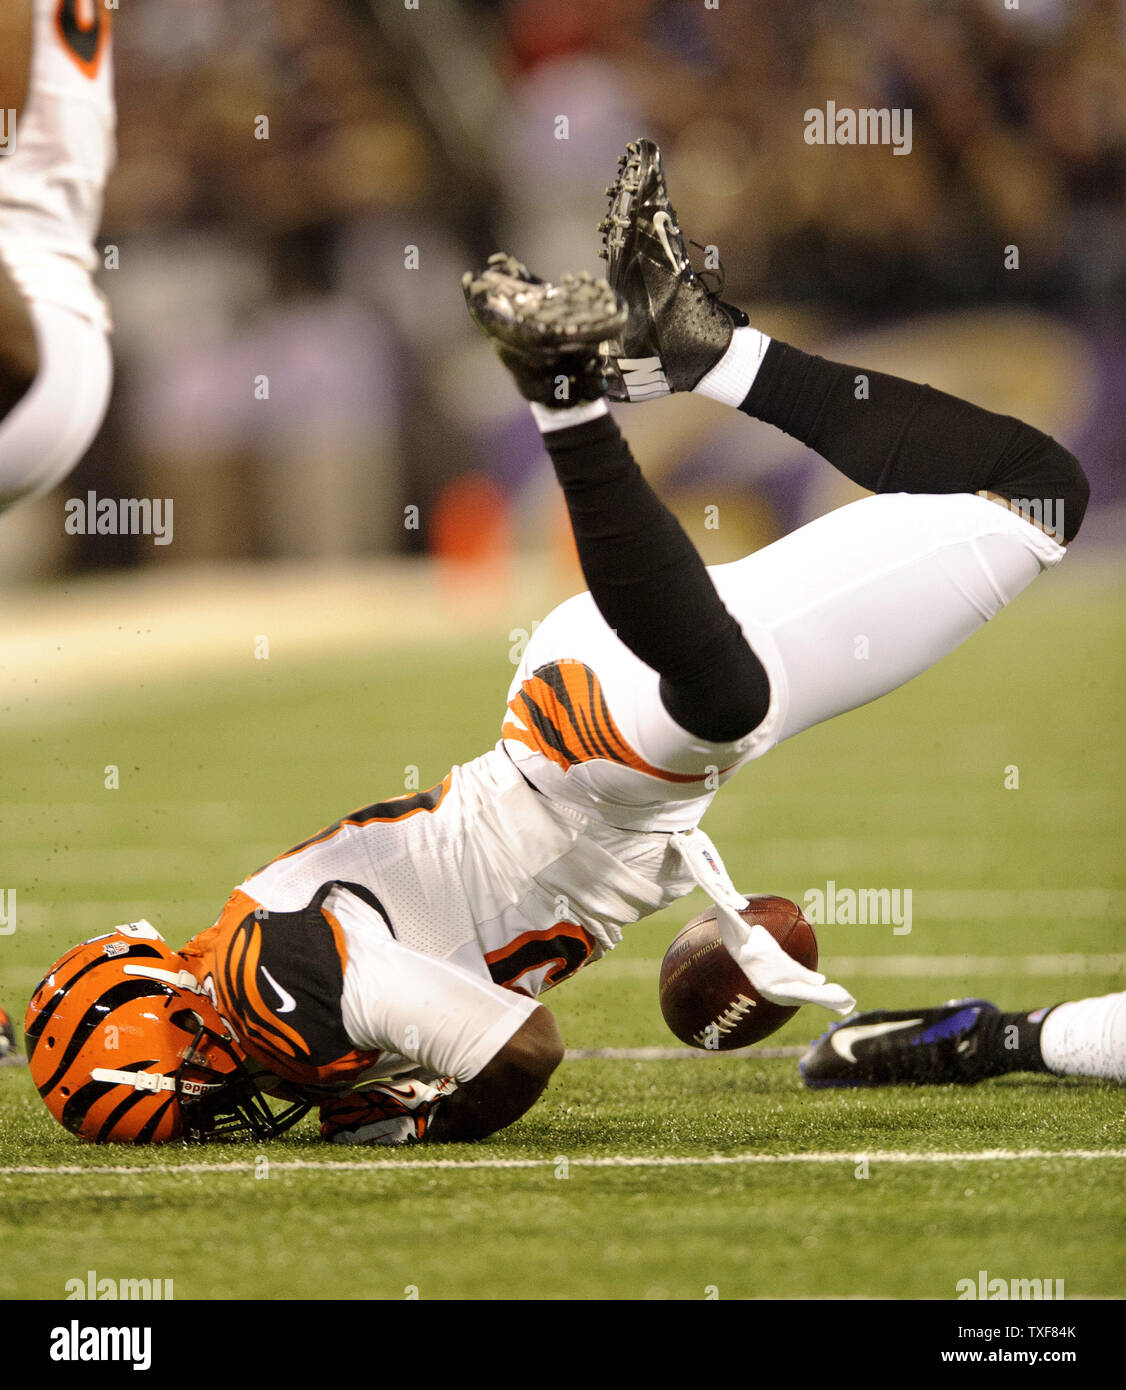 Cincinnati Bengals wide receiver Armon Binns falls head first after being tackled by Baltimore Ravens defensive back Lardarius Webb during the first quarter at M&T Bank Stadium in Baltimore, Maryland on September 10, 2012. At half time the Ravens are leading 17-10. UPI/Matt Roth Stock Photo